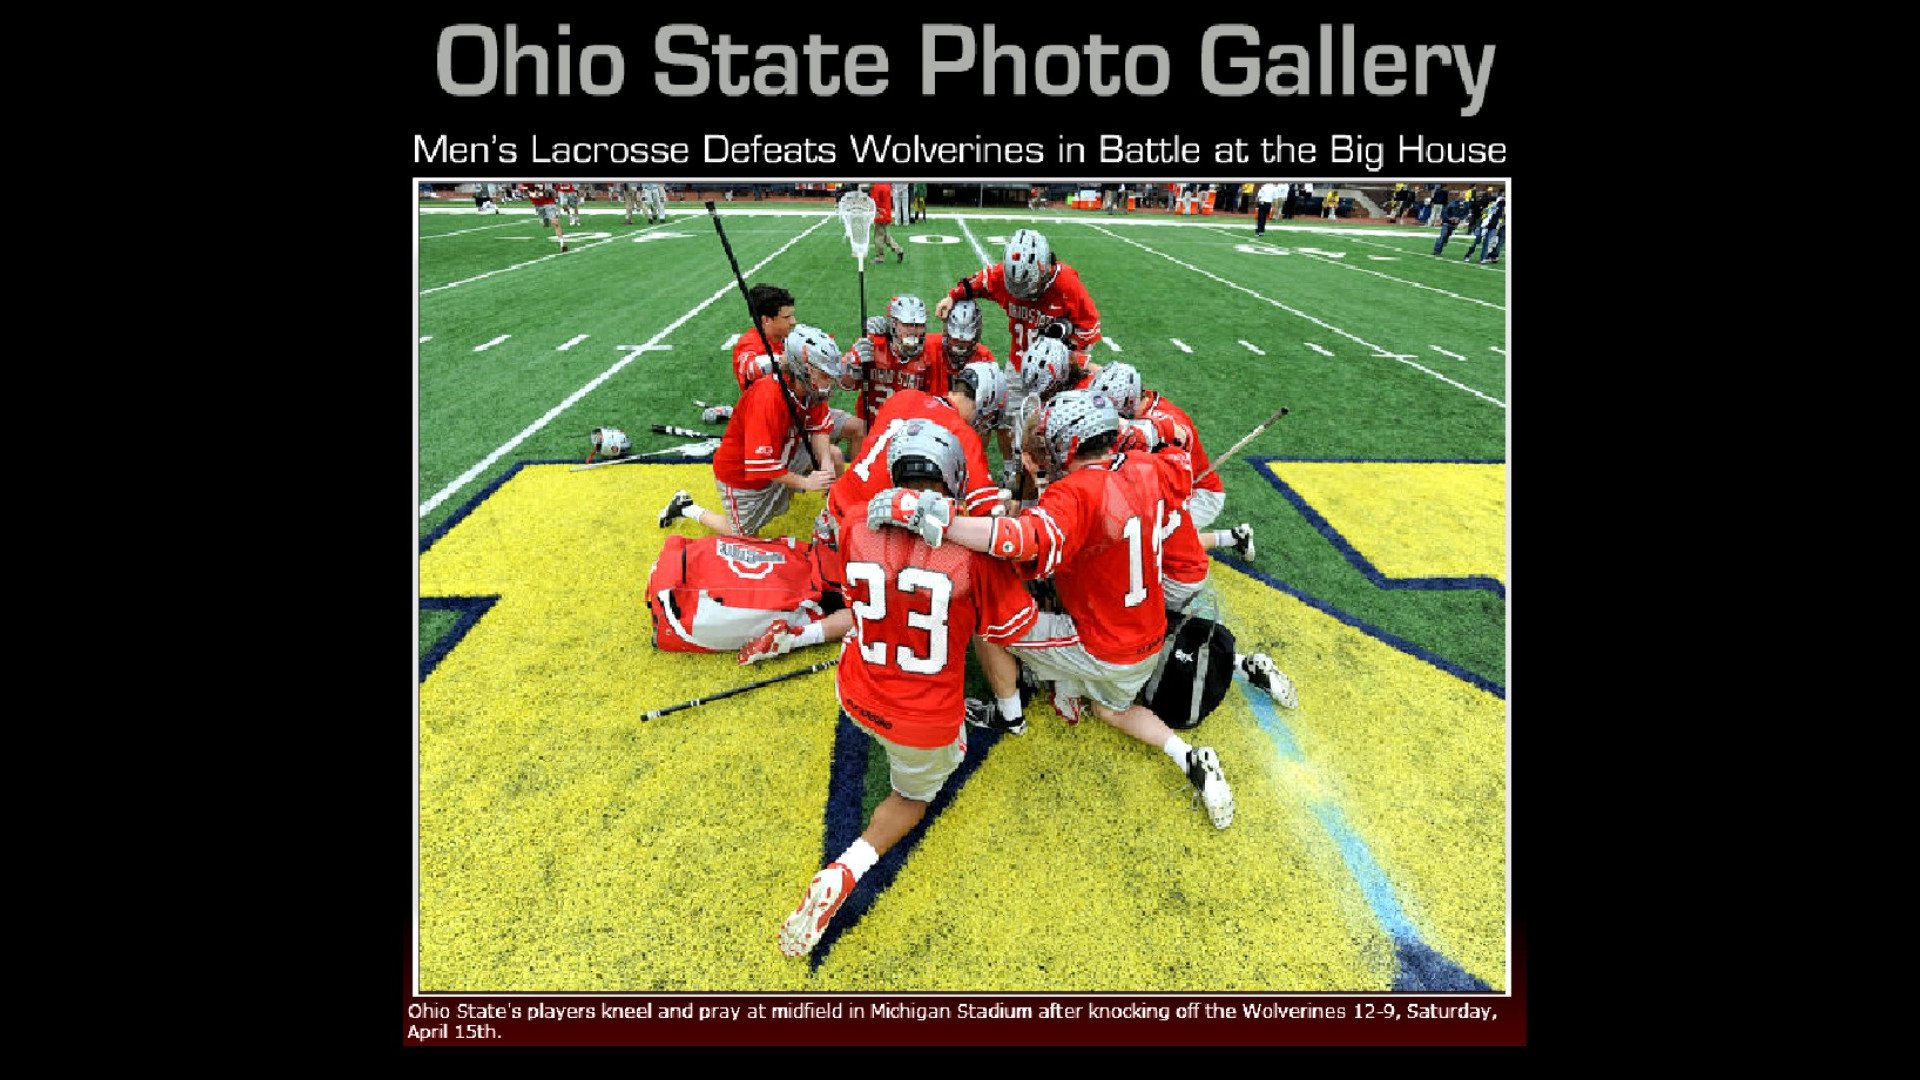 1920x1080 Ohio State Buckeyes images 2012 MEN'S LACROSSE OSU DEFEATS TSUN HD wallpaper  and background photos